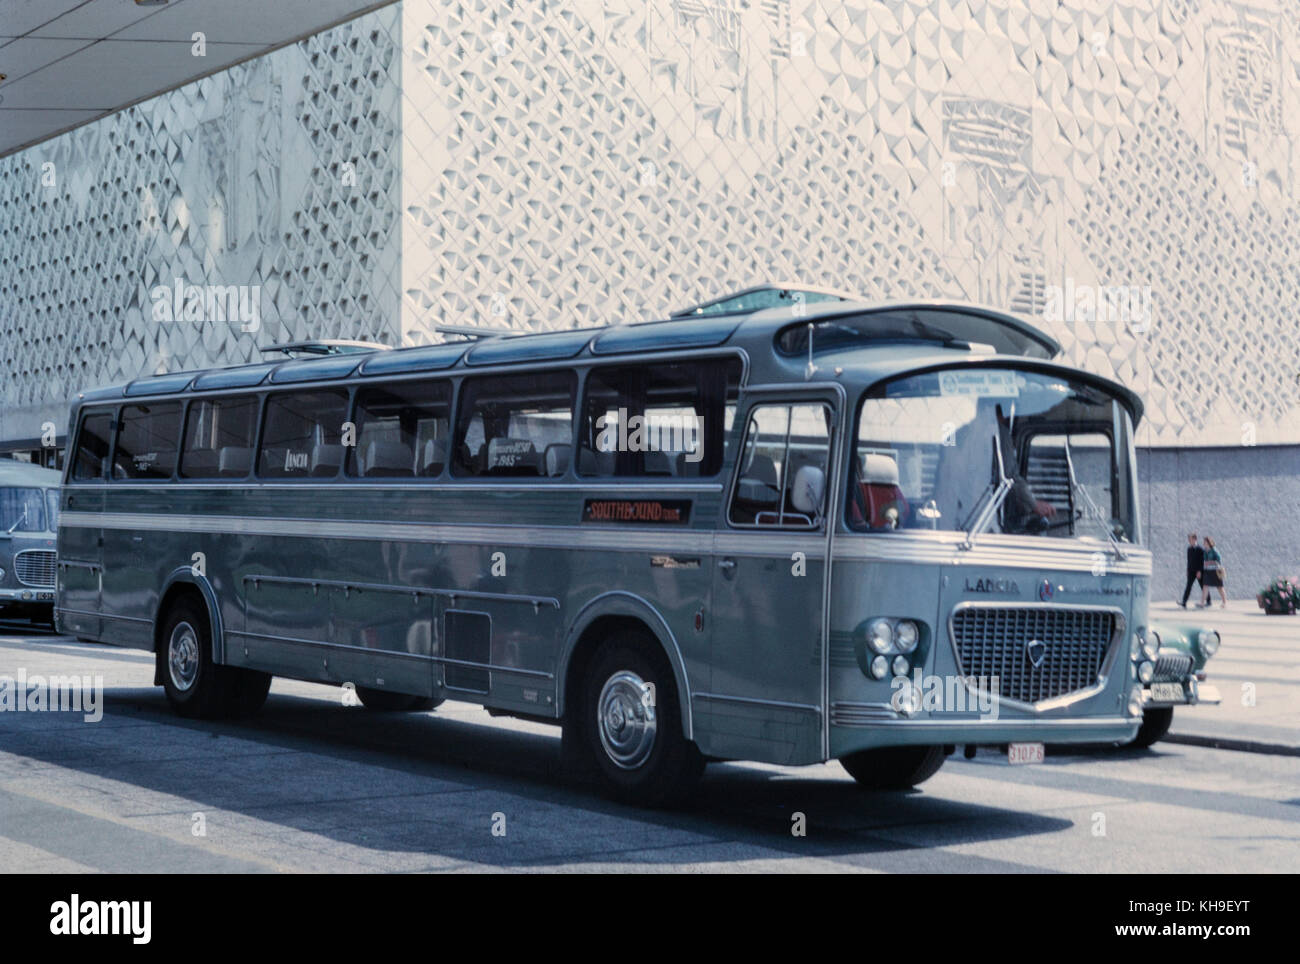 A vintage Lancia bus or coach. Image taken in August 1965. Stock Photo